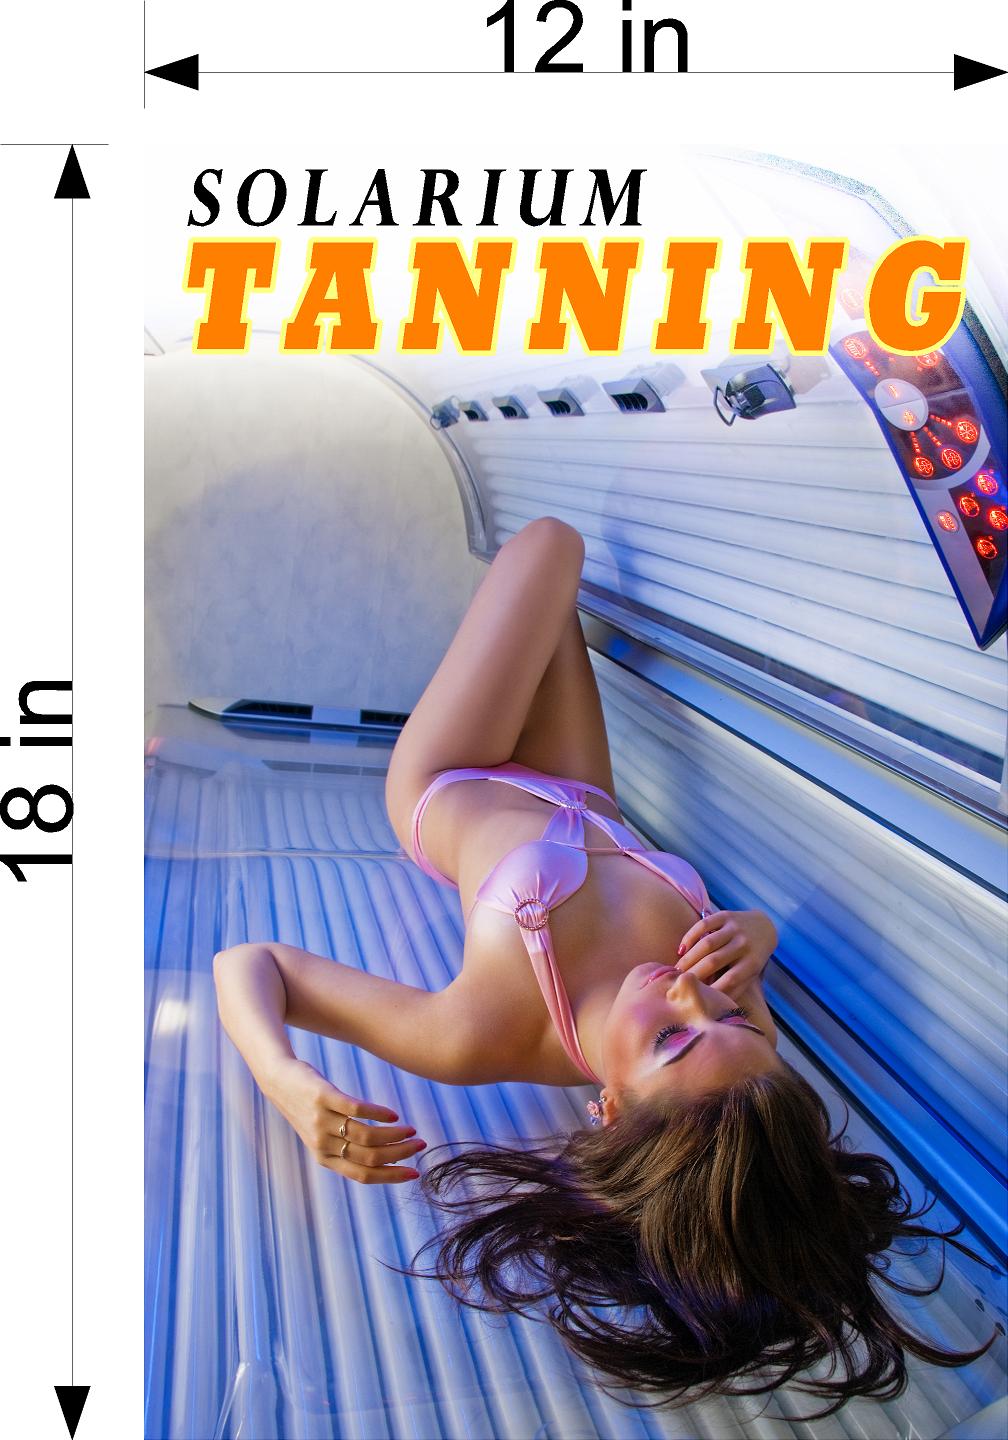 Tanning 03 Wallpaper Poster Decal with Adhesive Backing Wall Sticker Decor Interior Sign Spray Service Solarium Vertical